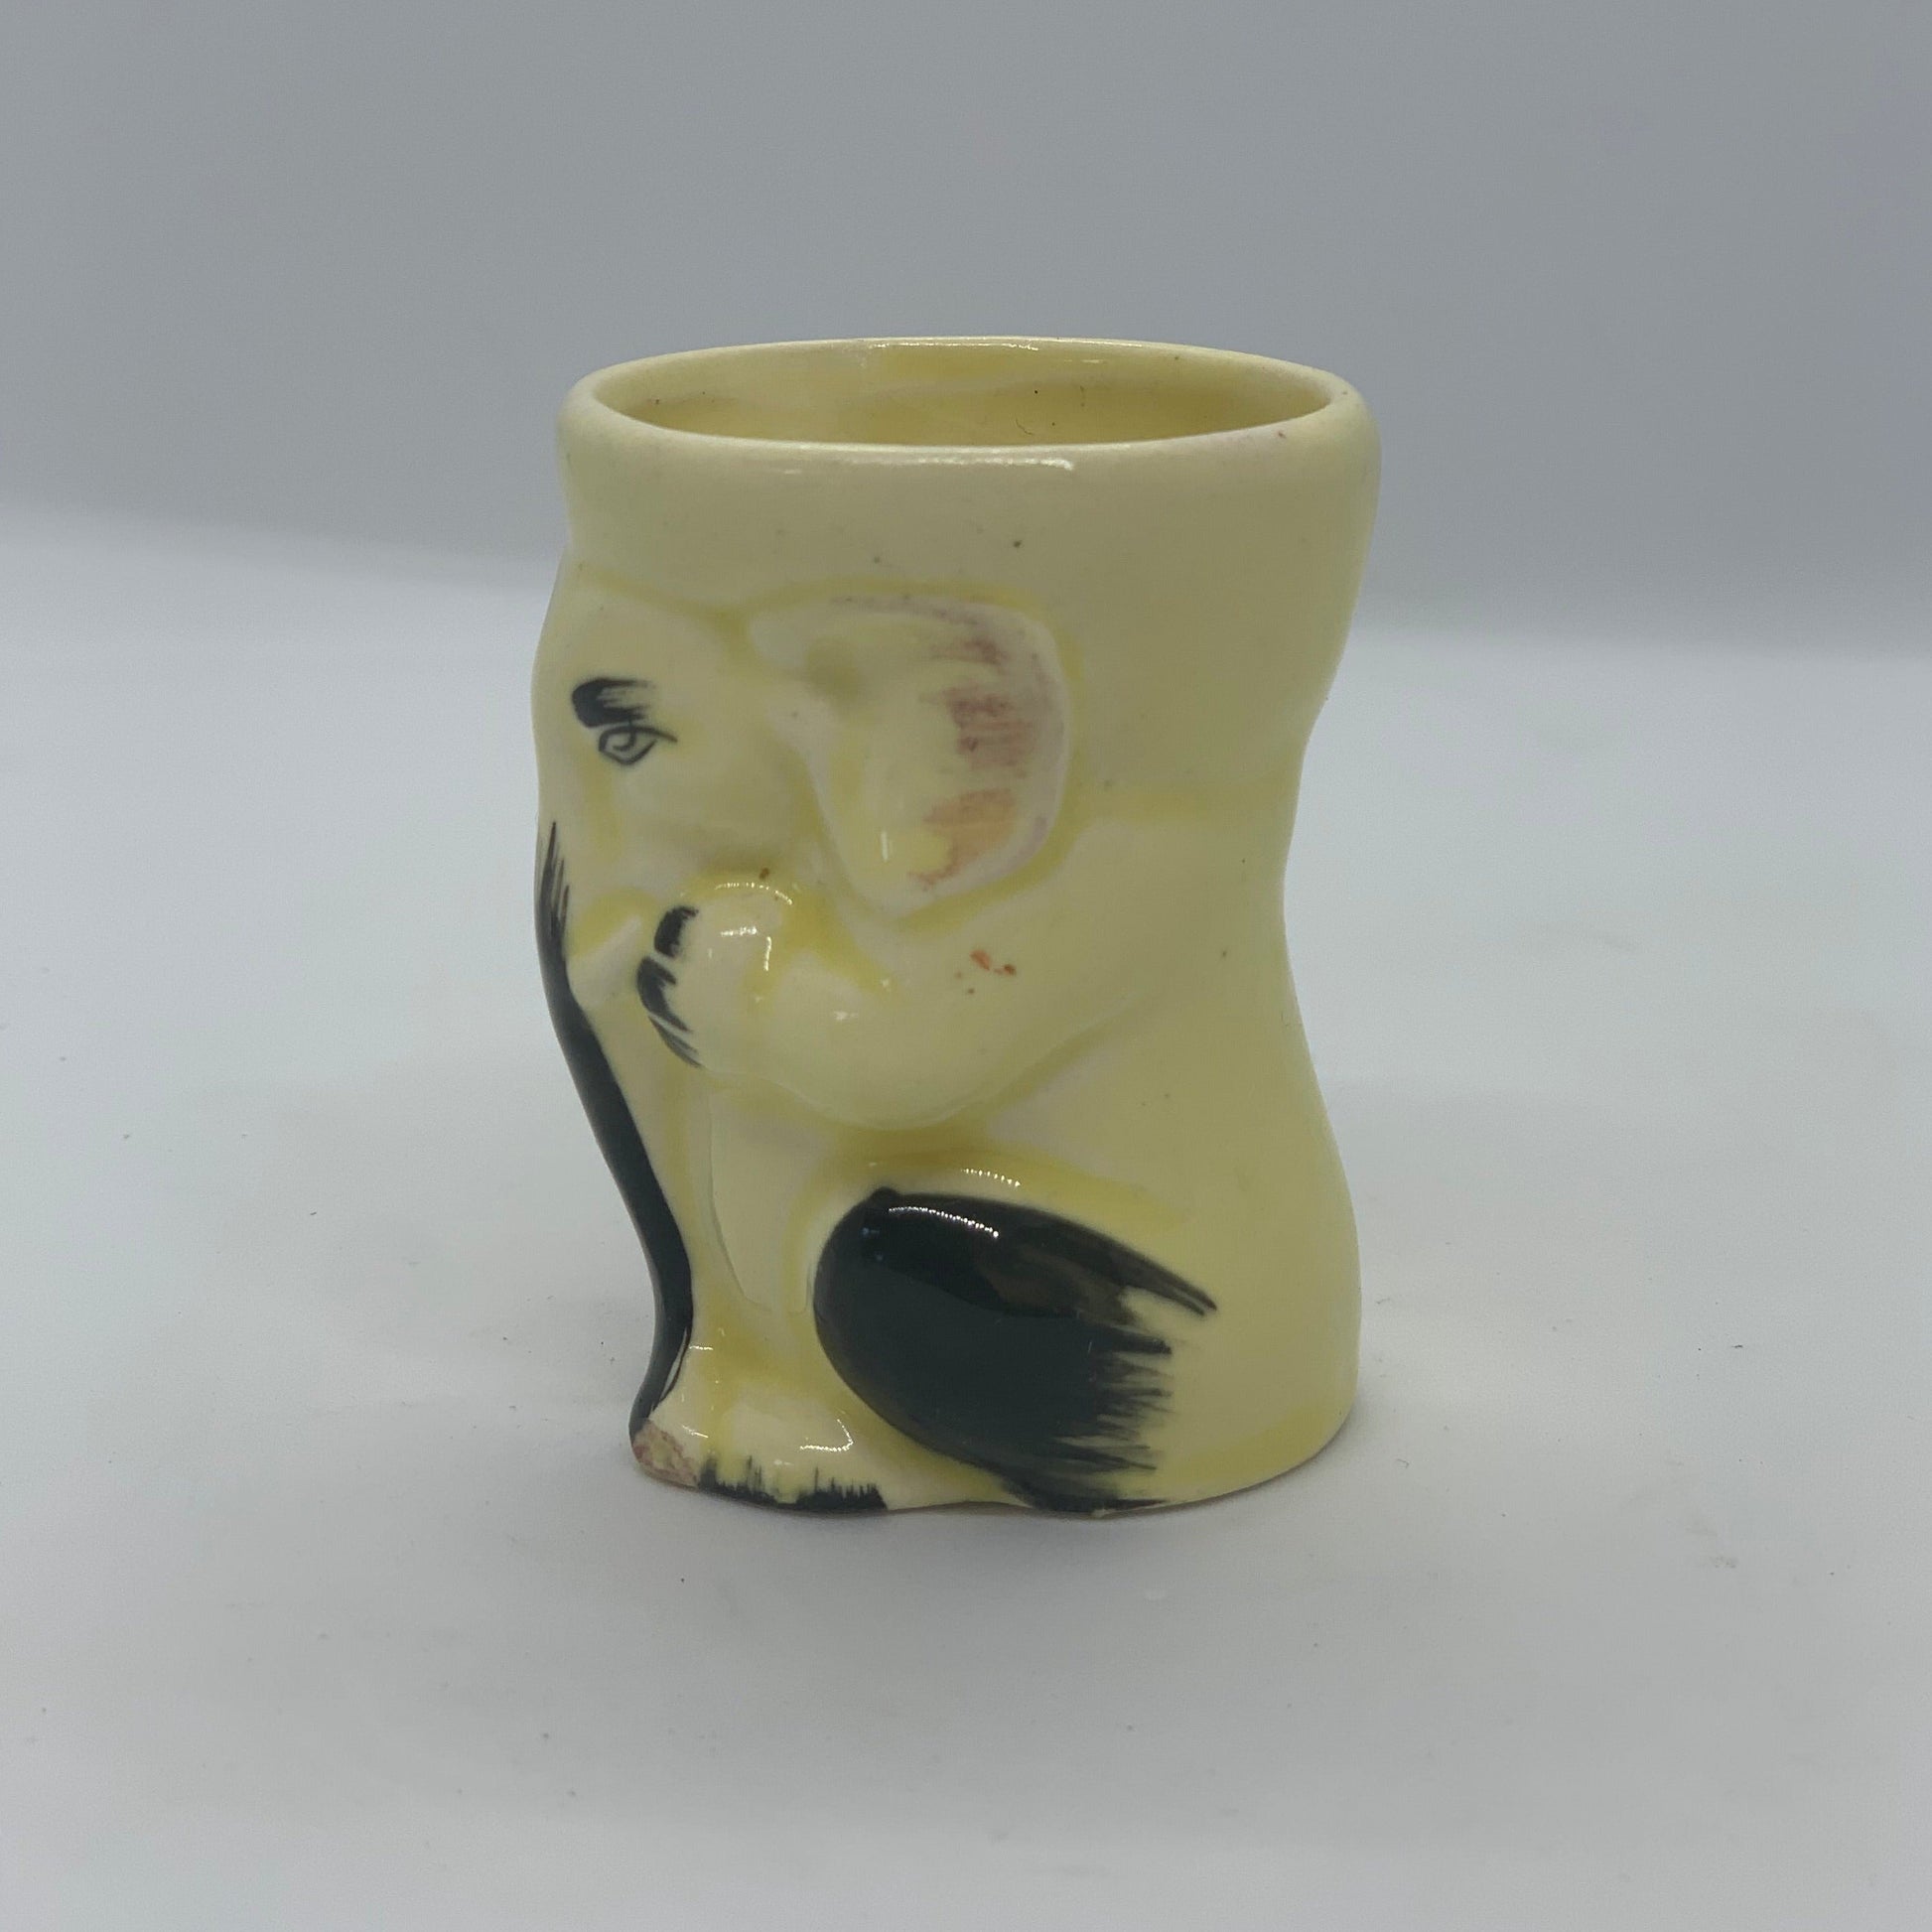 Indistinguishable Brand - Egg Cup Collectibles